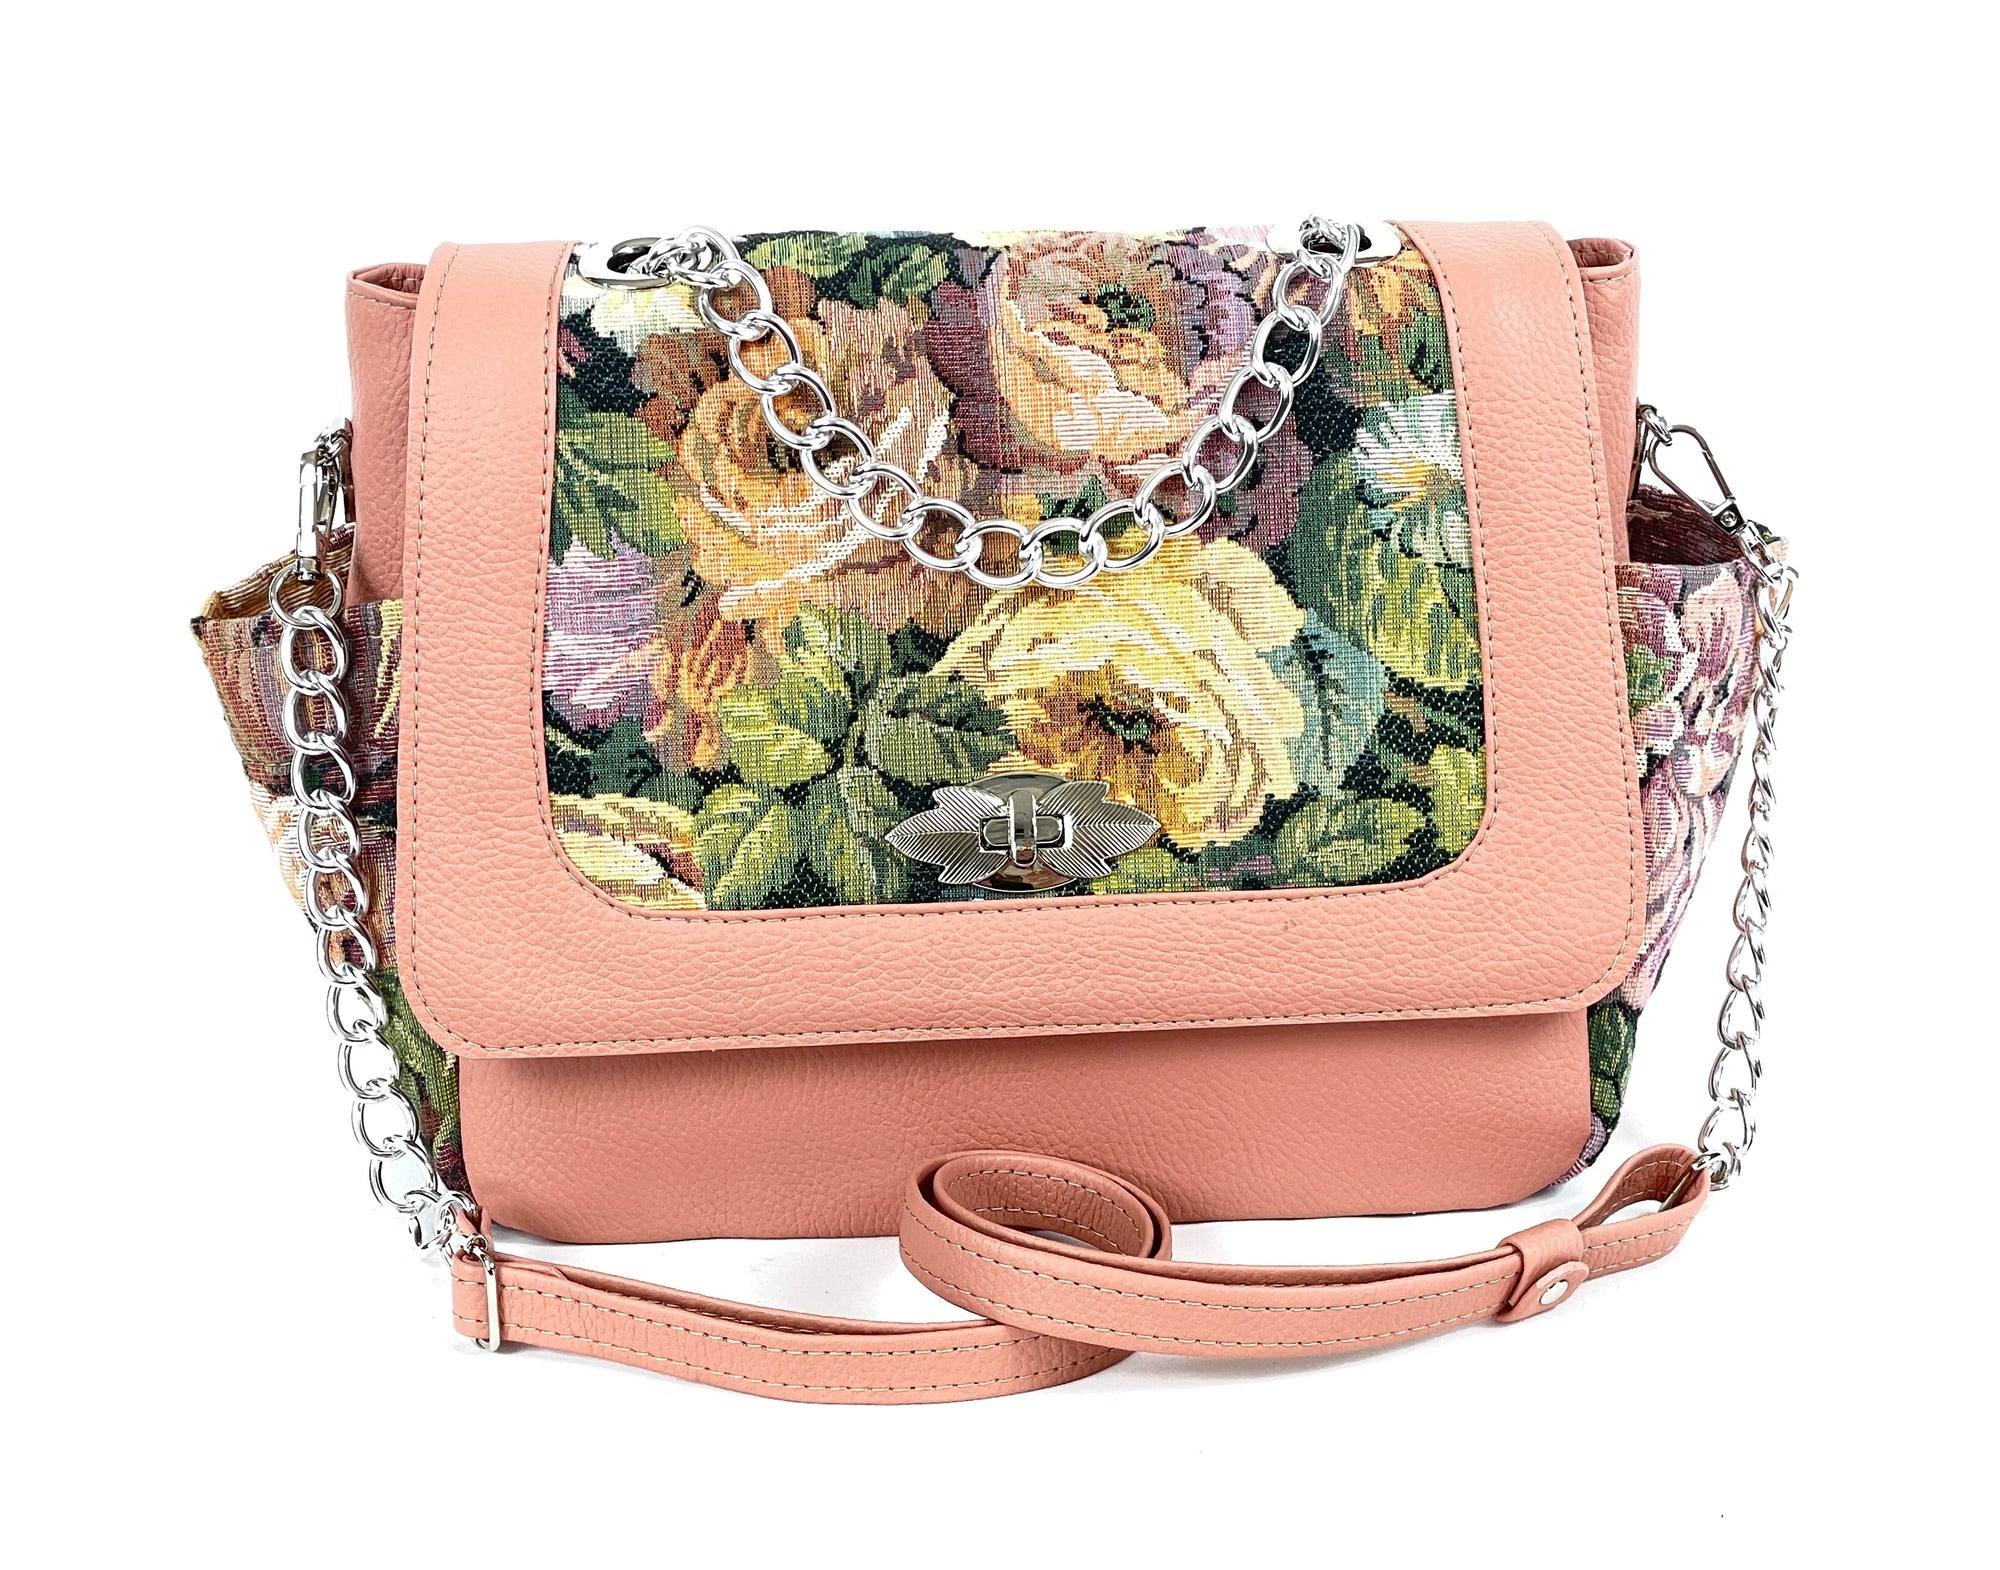 Floral Tapestry and Peach Leather Flap Bag